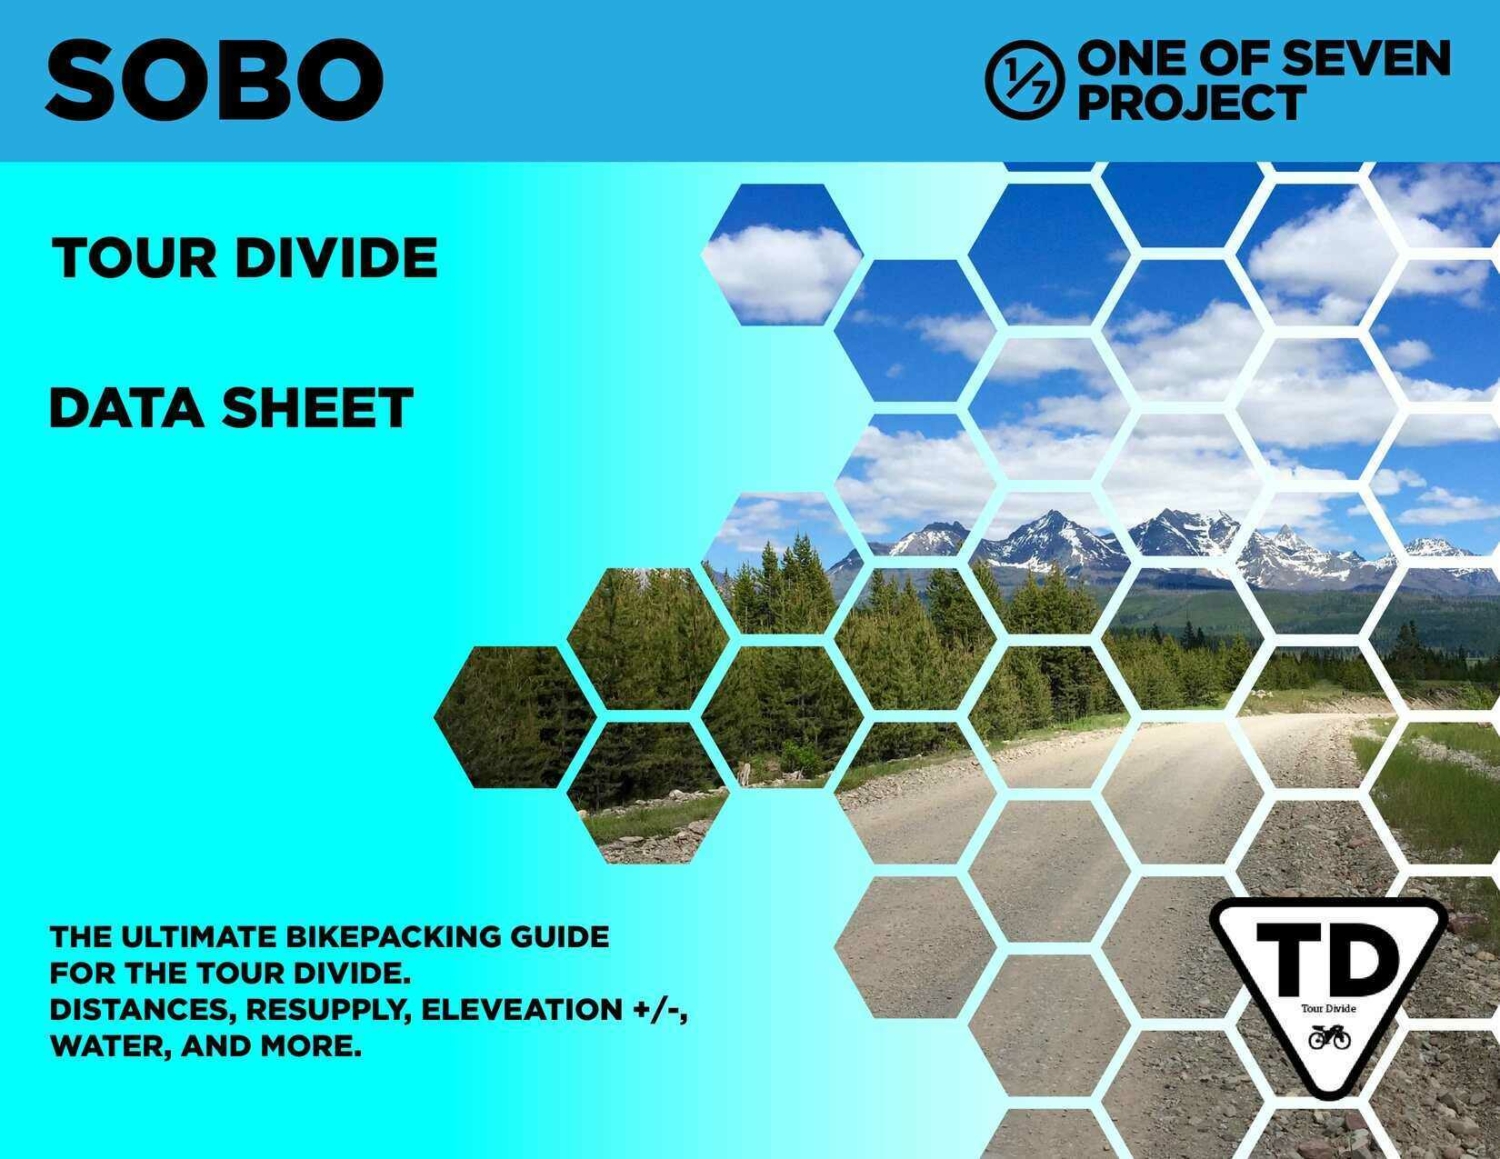 Tour Divide SOBO Data Sheet Cover bikepacking guides planning aids